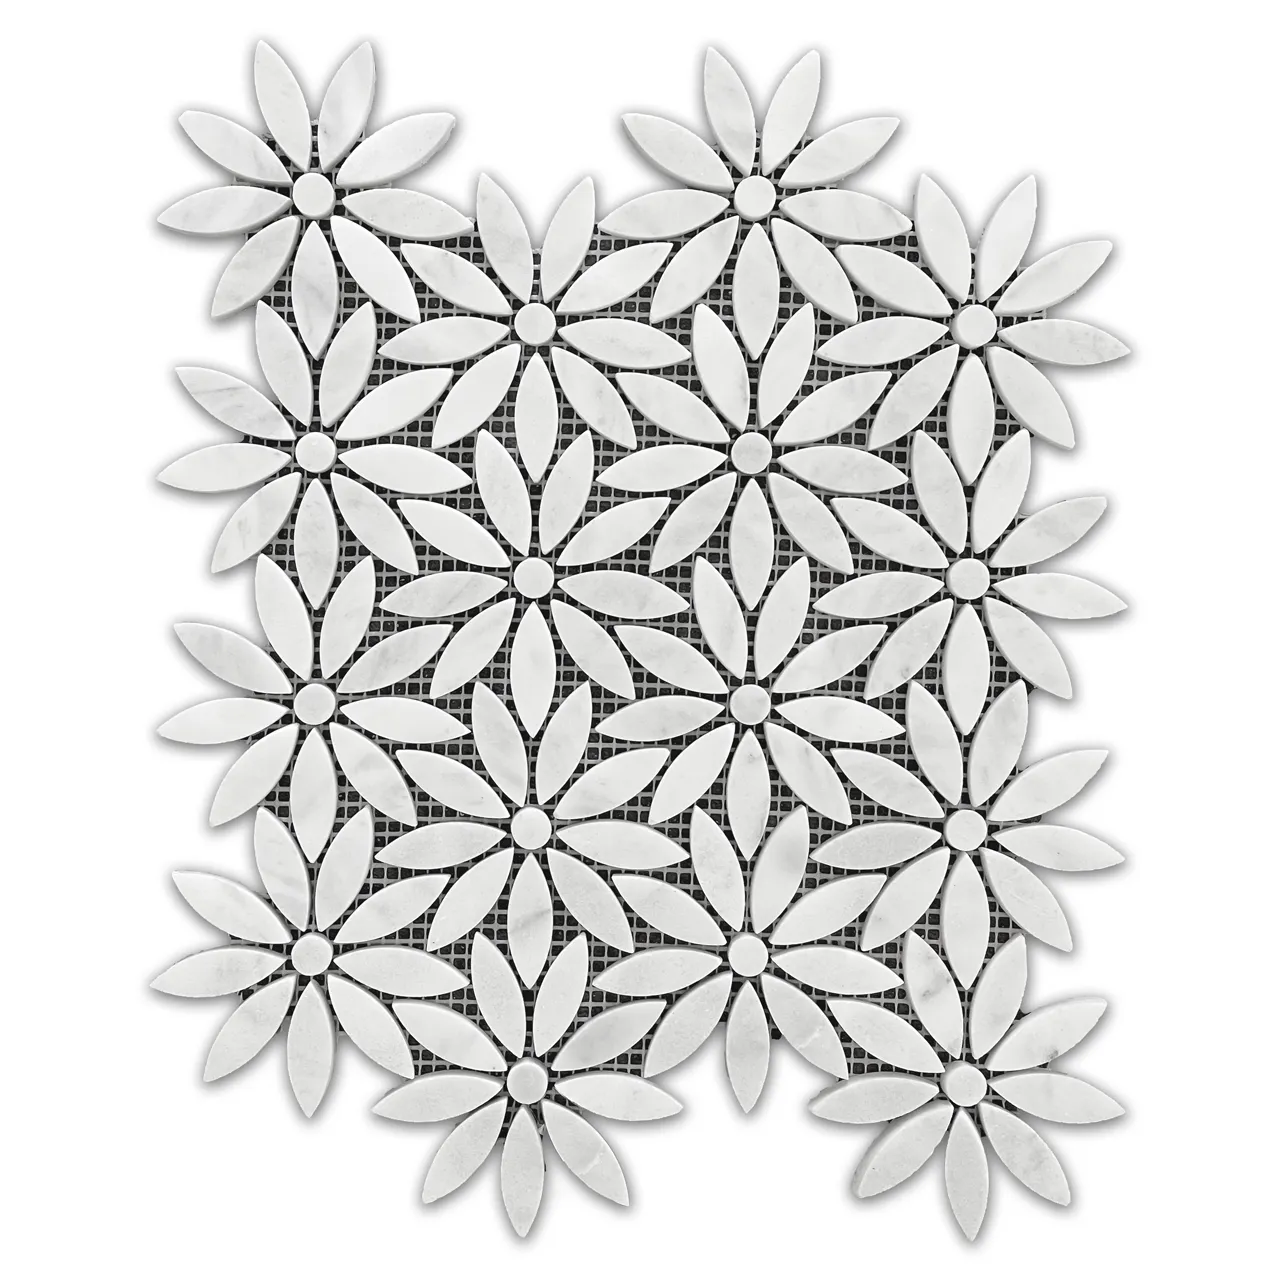 Carrara White Marble With Carrara White Accent Daisy Flower Waterjet Mosaic Tile Honed